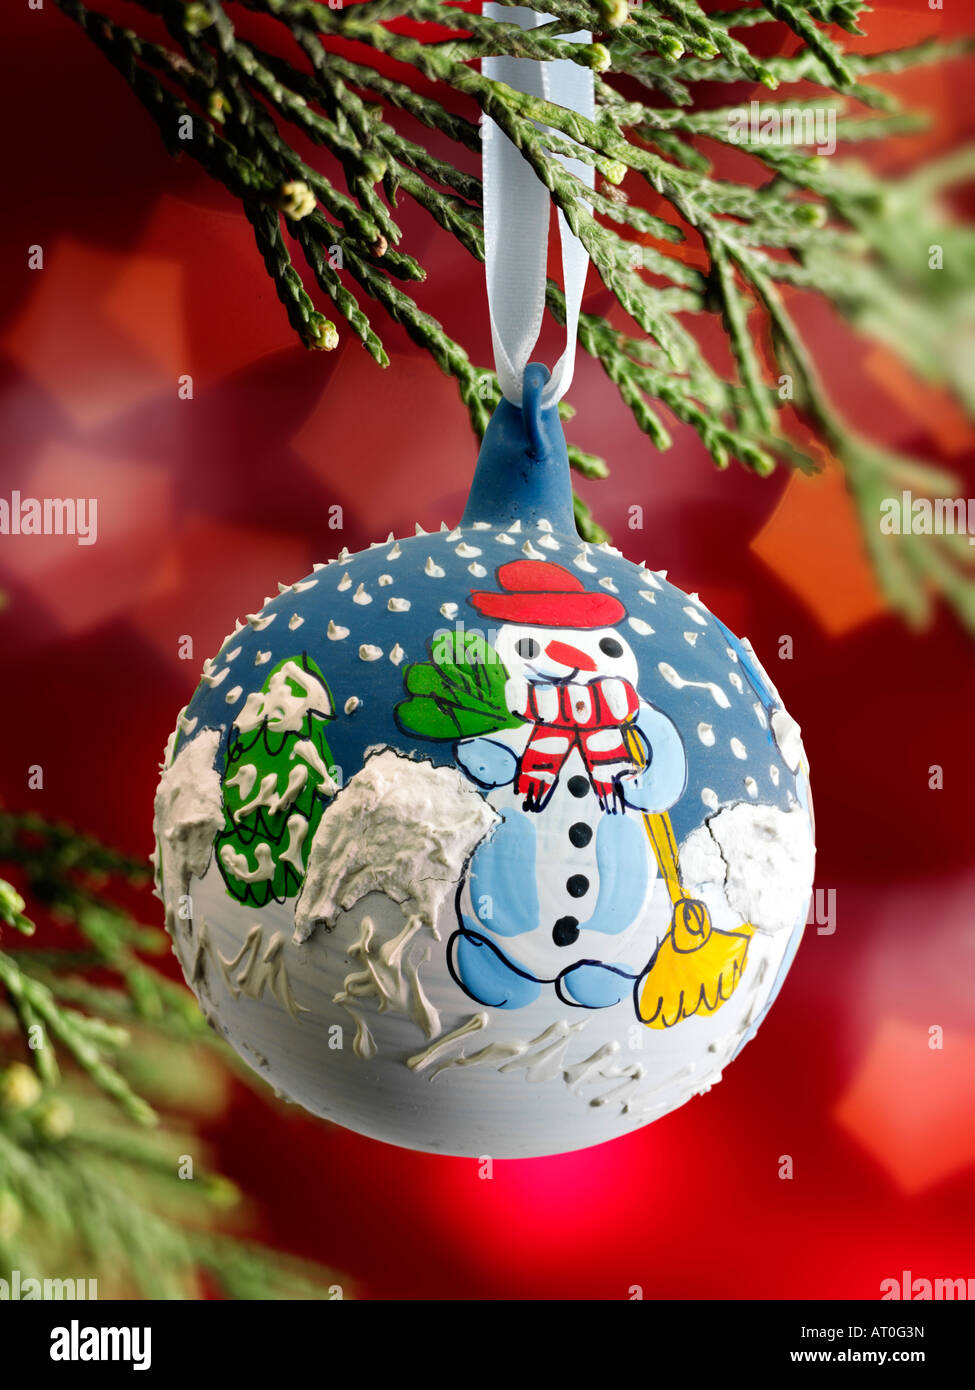 traditional  festive decorated Christmas snowman bauble hanging on a Christmas tree with lights behind Stock Photo